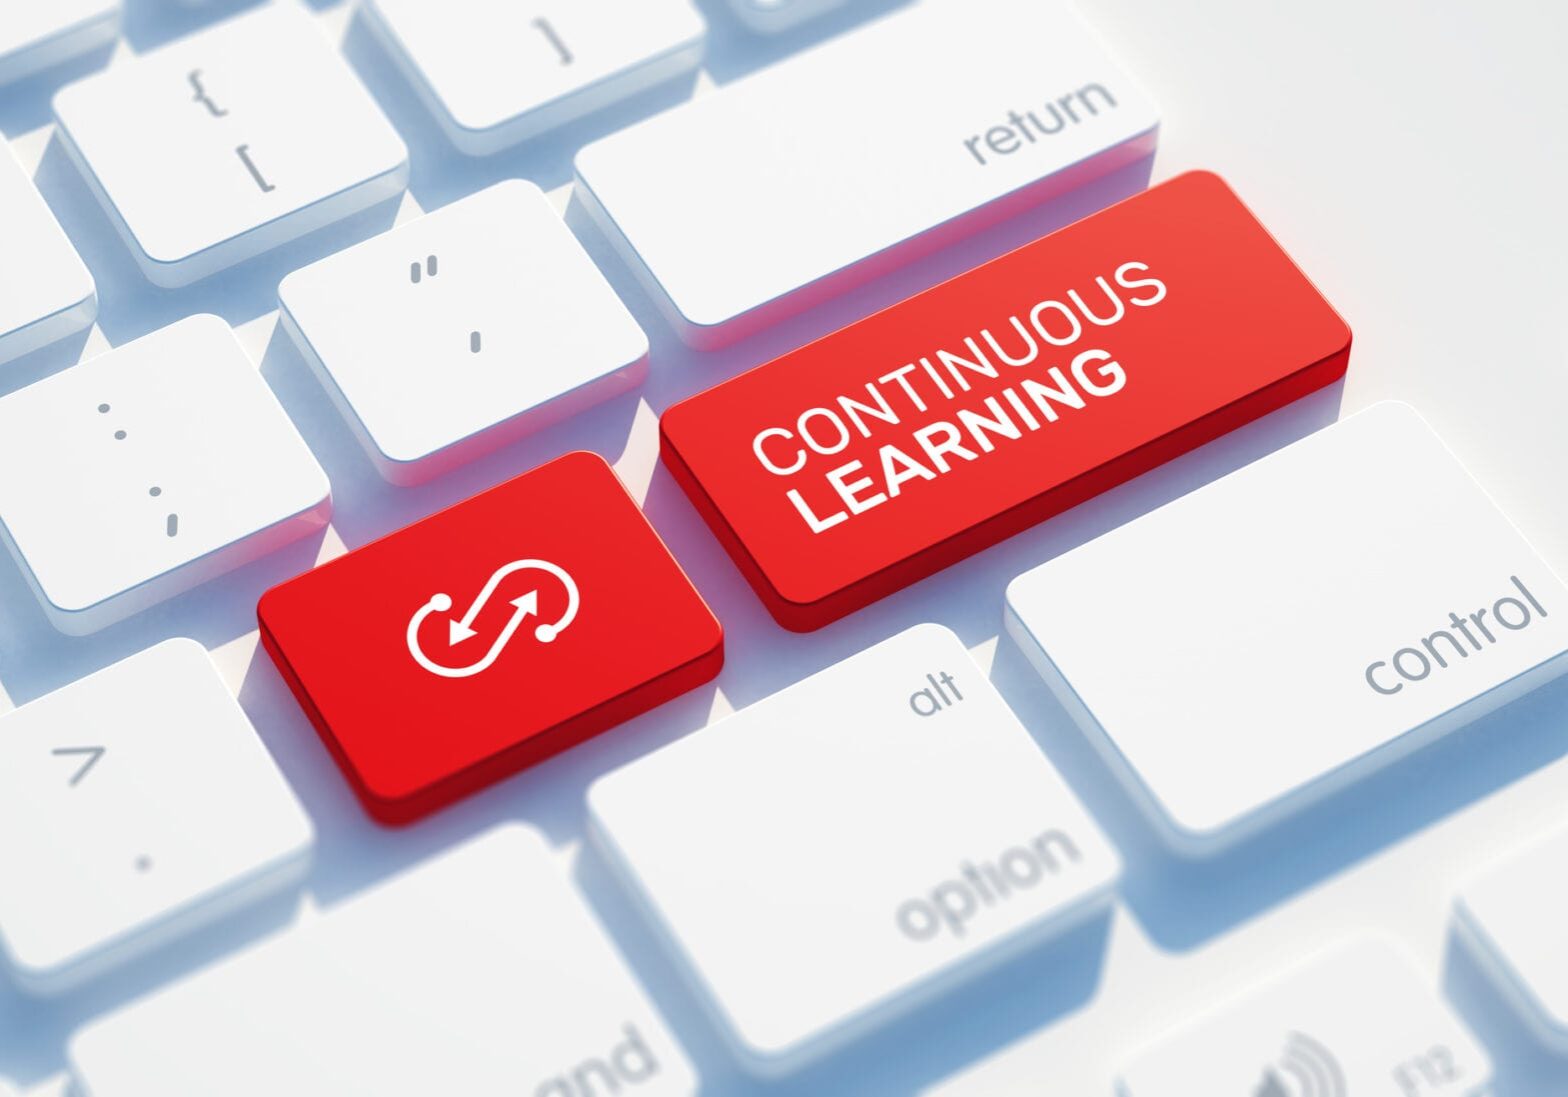 Continuous Learning Icon Concept on the Red Keyboard Button